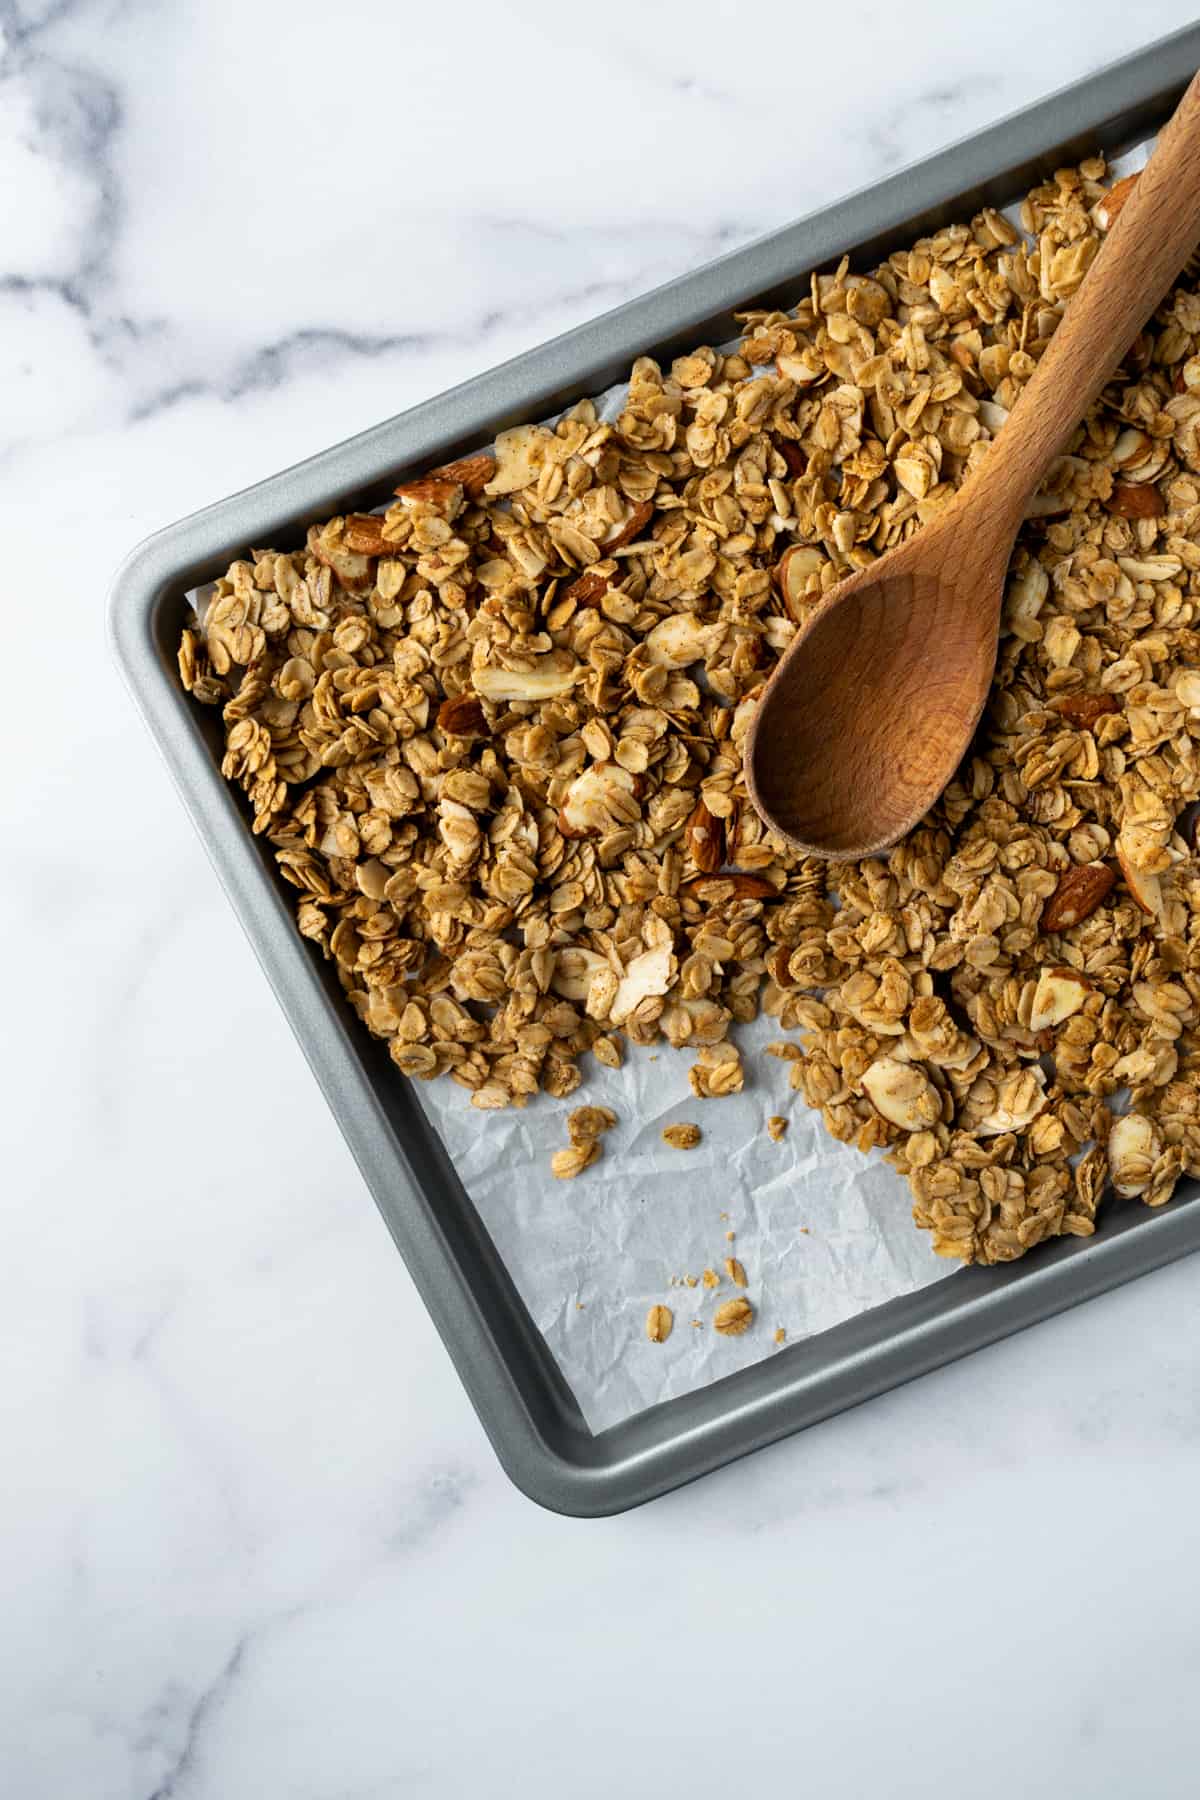 Almond Vanilla Granola on a baking sheet with a wooden spoon.